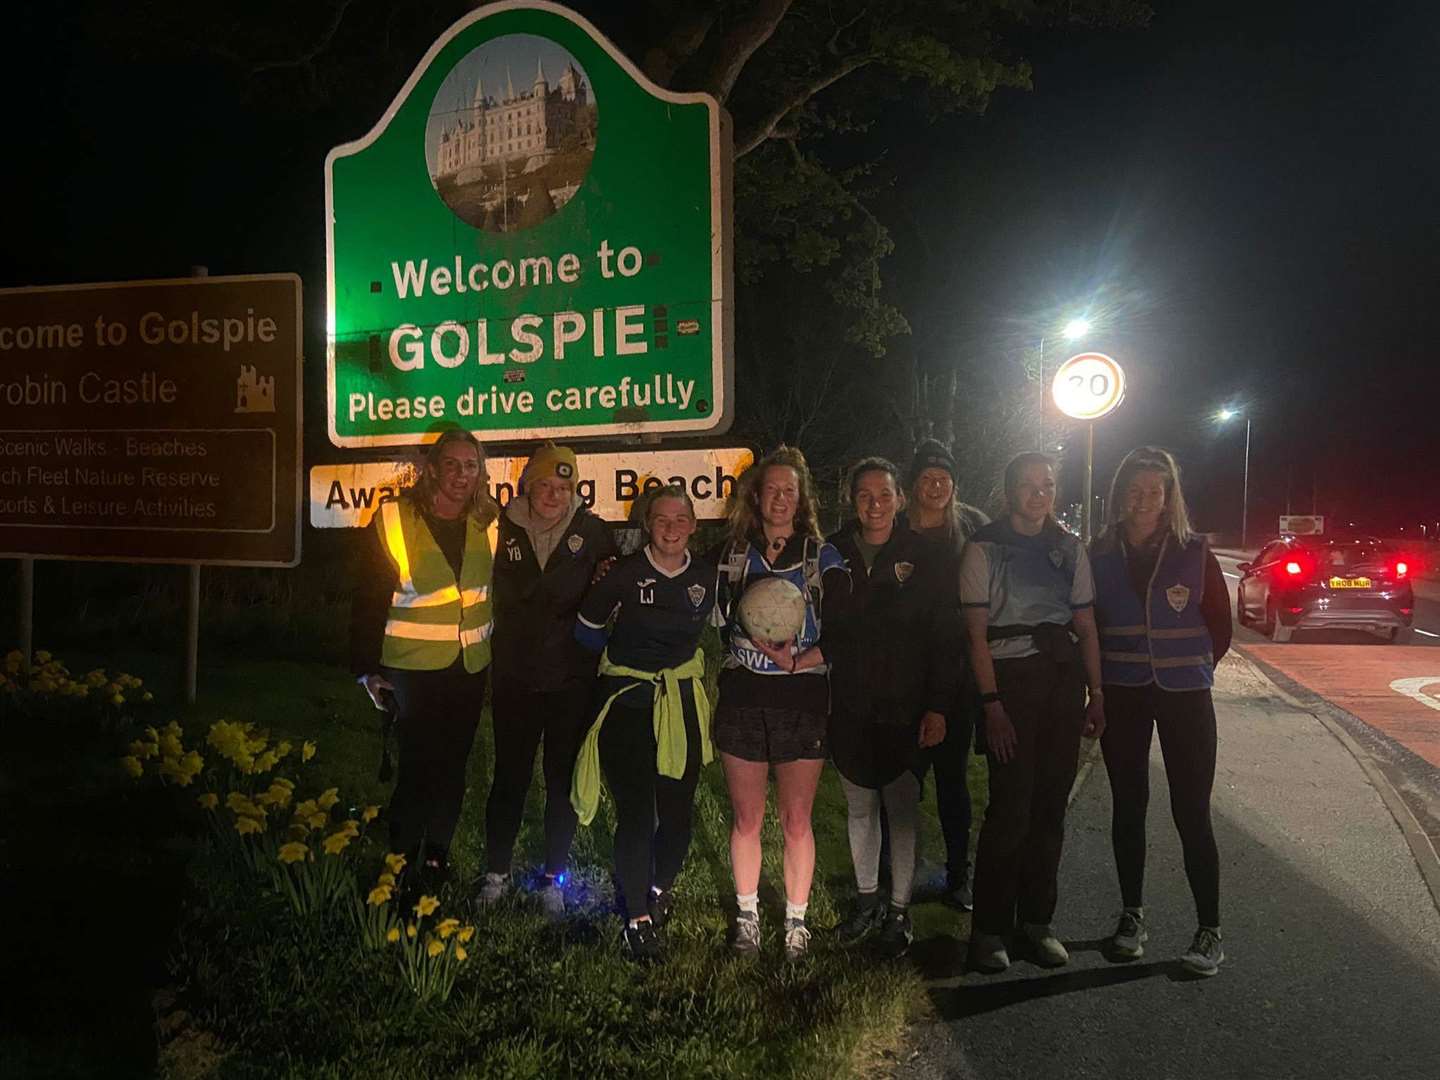 Franci reached Golspie some 26 hours after she had started out. She has thanked teammates for their support.